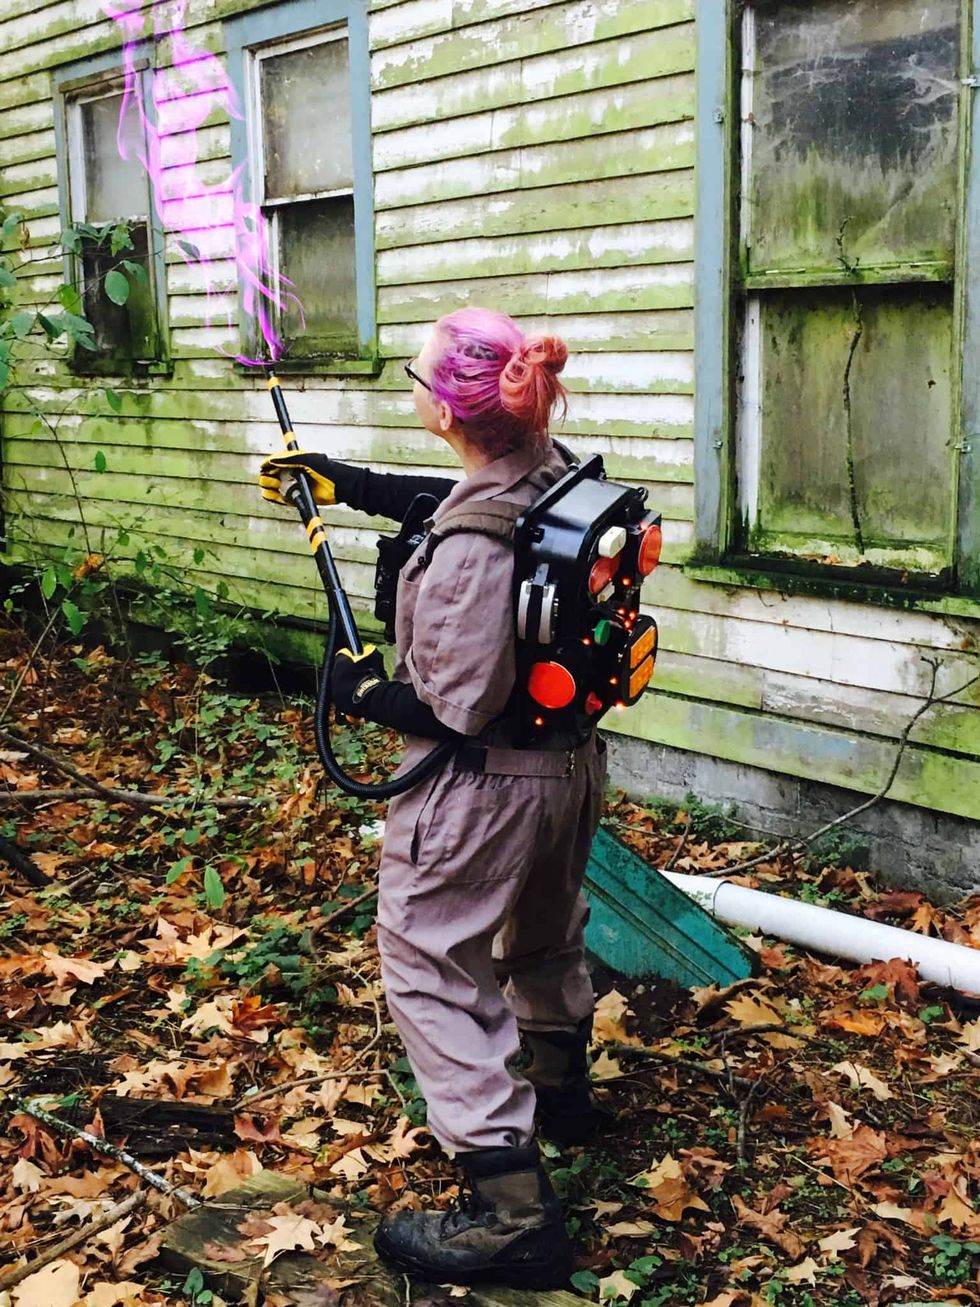 women's ghostbusters costume with a colored proton pack and gun